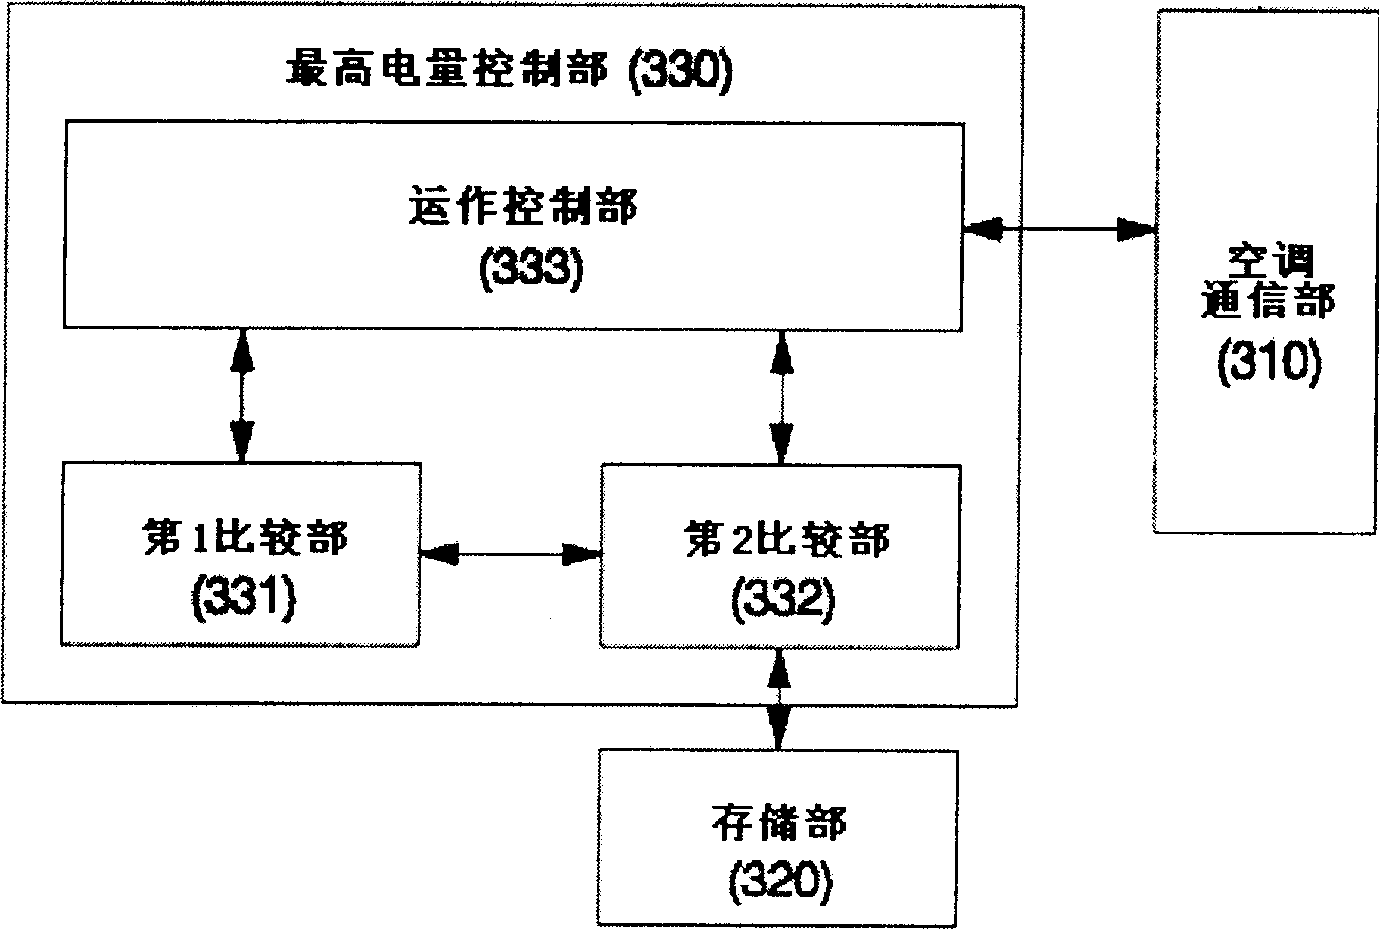 Maximum electric charge quantity control system and operation for air conditioner